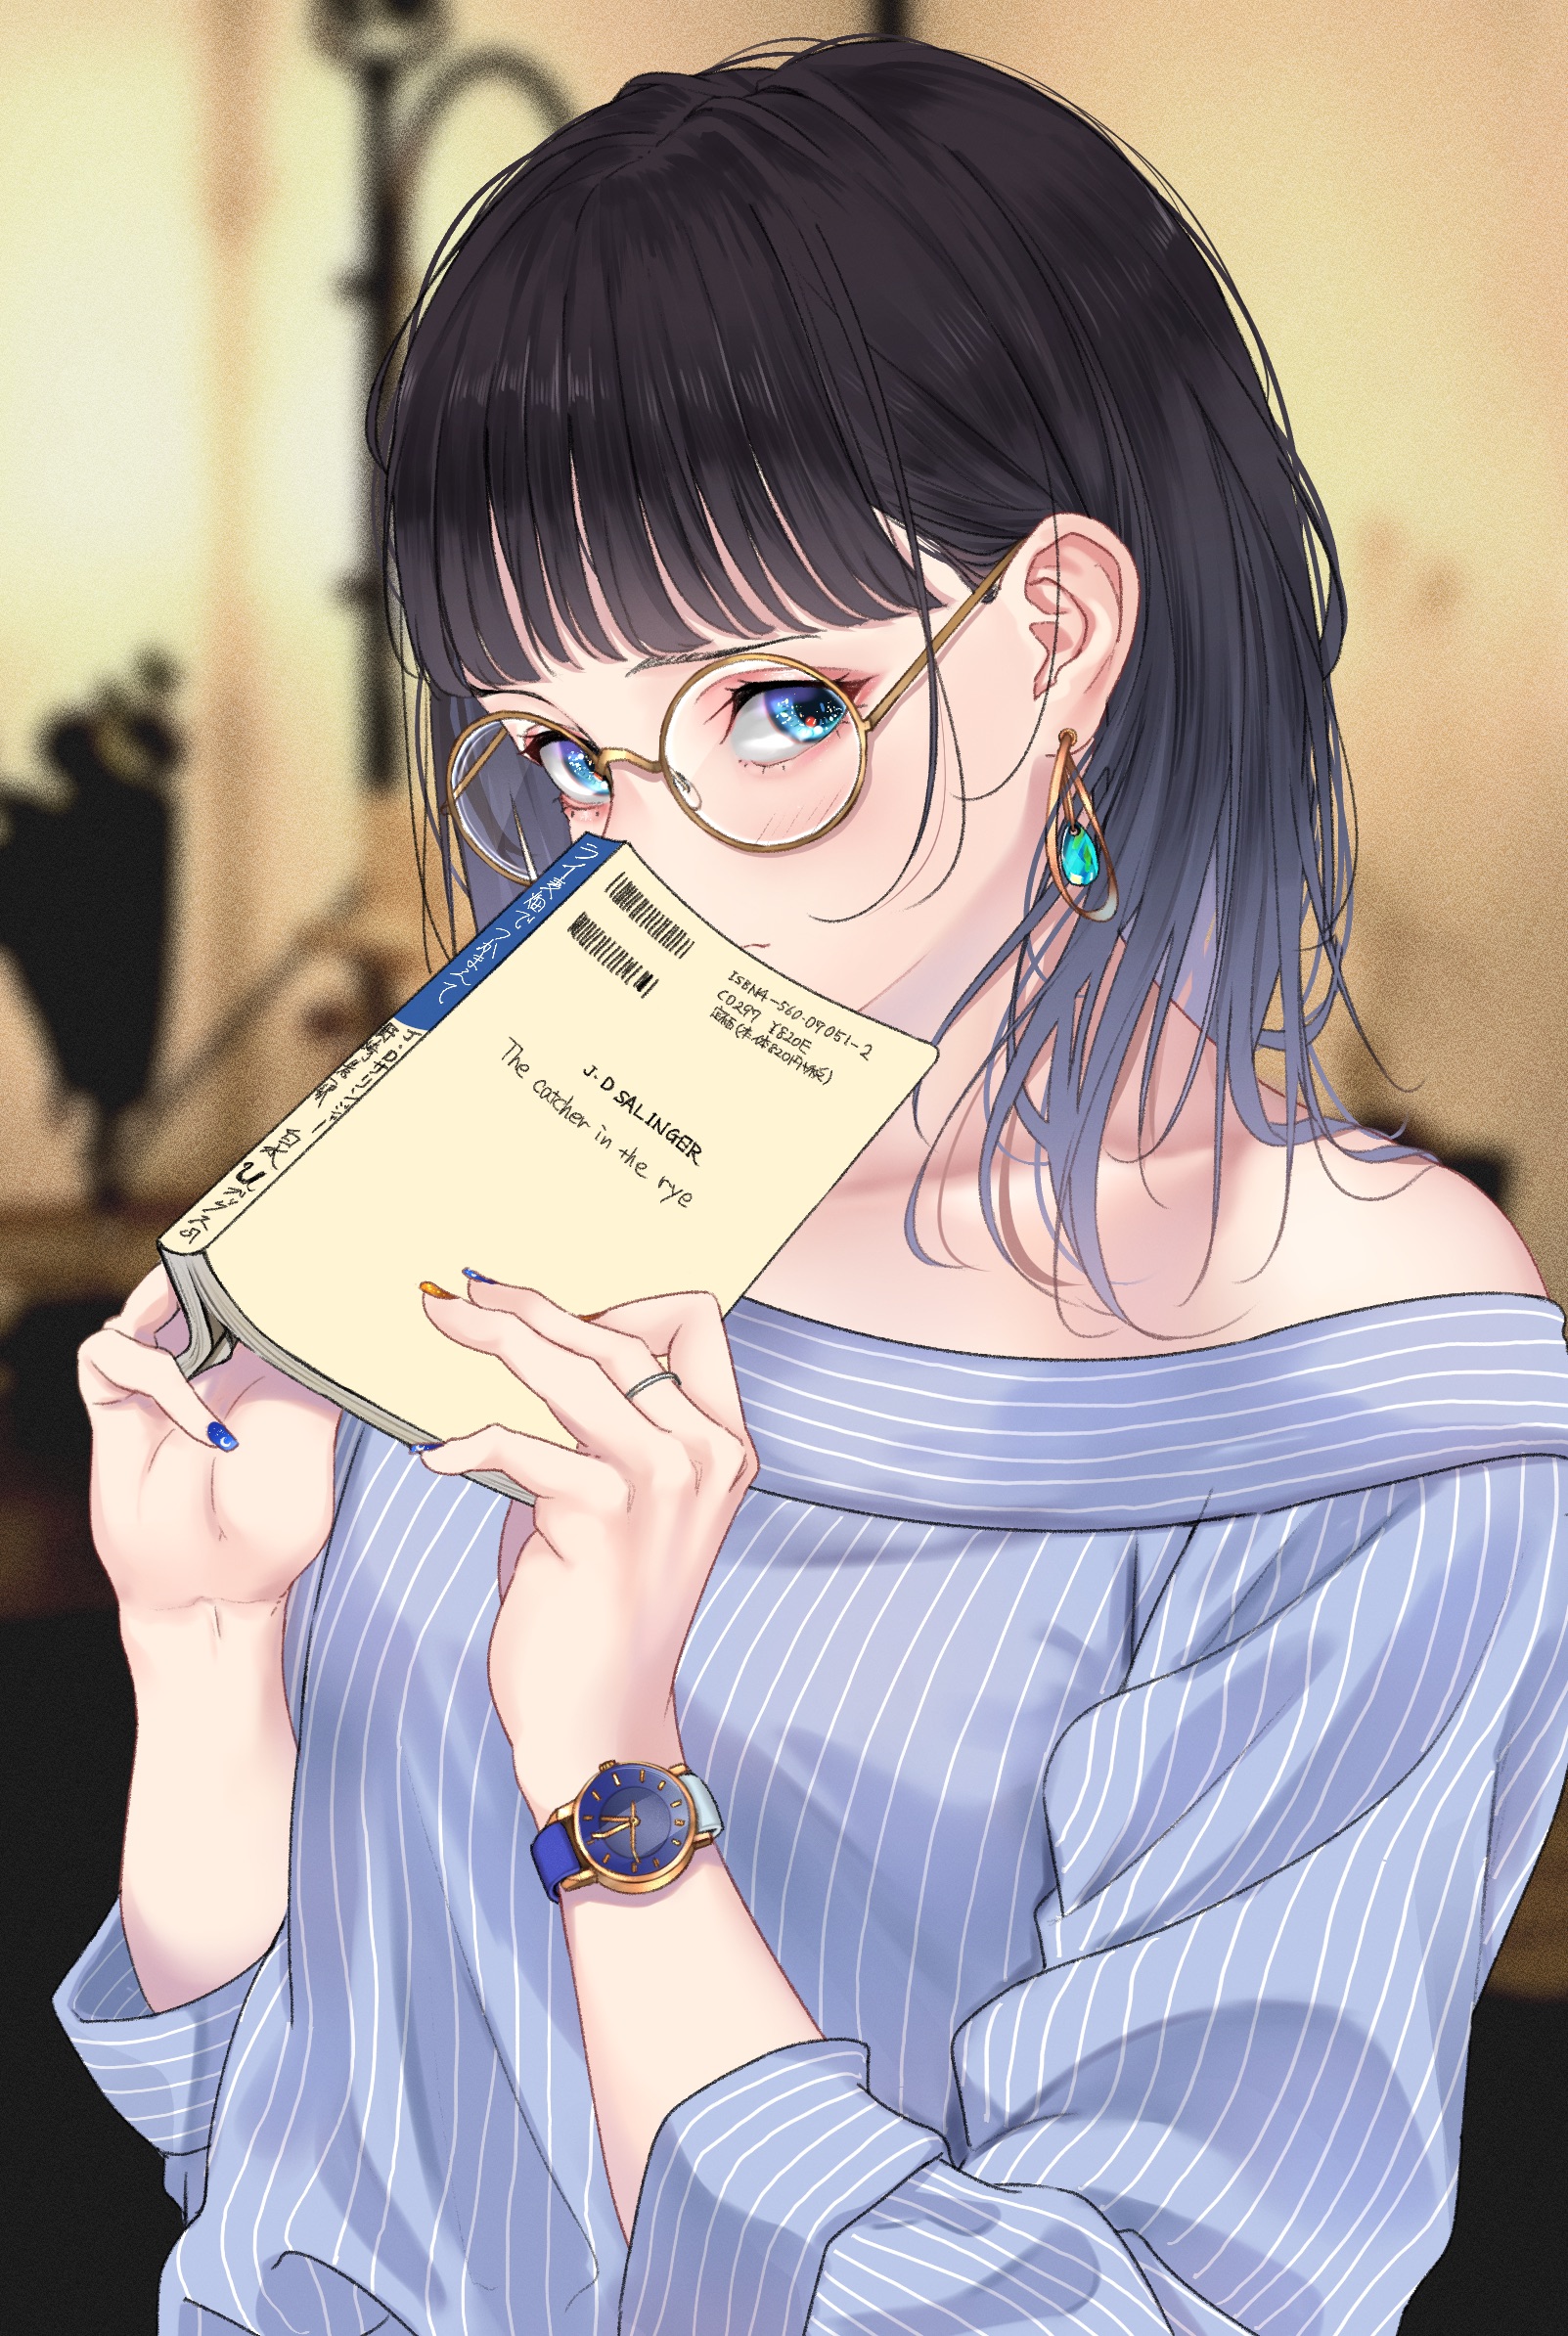 Anime 1603x2388 anime girls portrait display original characters anime books wristwatch dark hair glasses painted nails watch